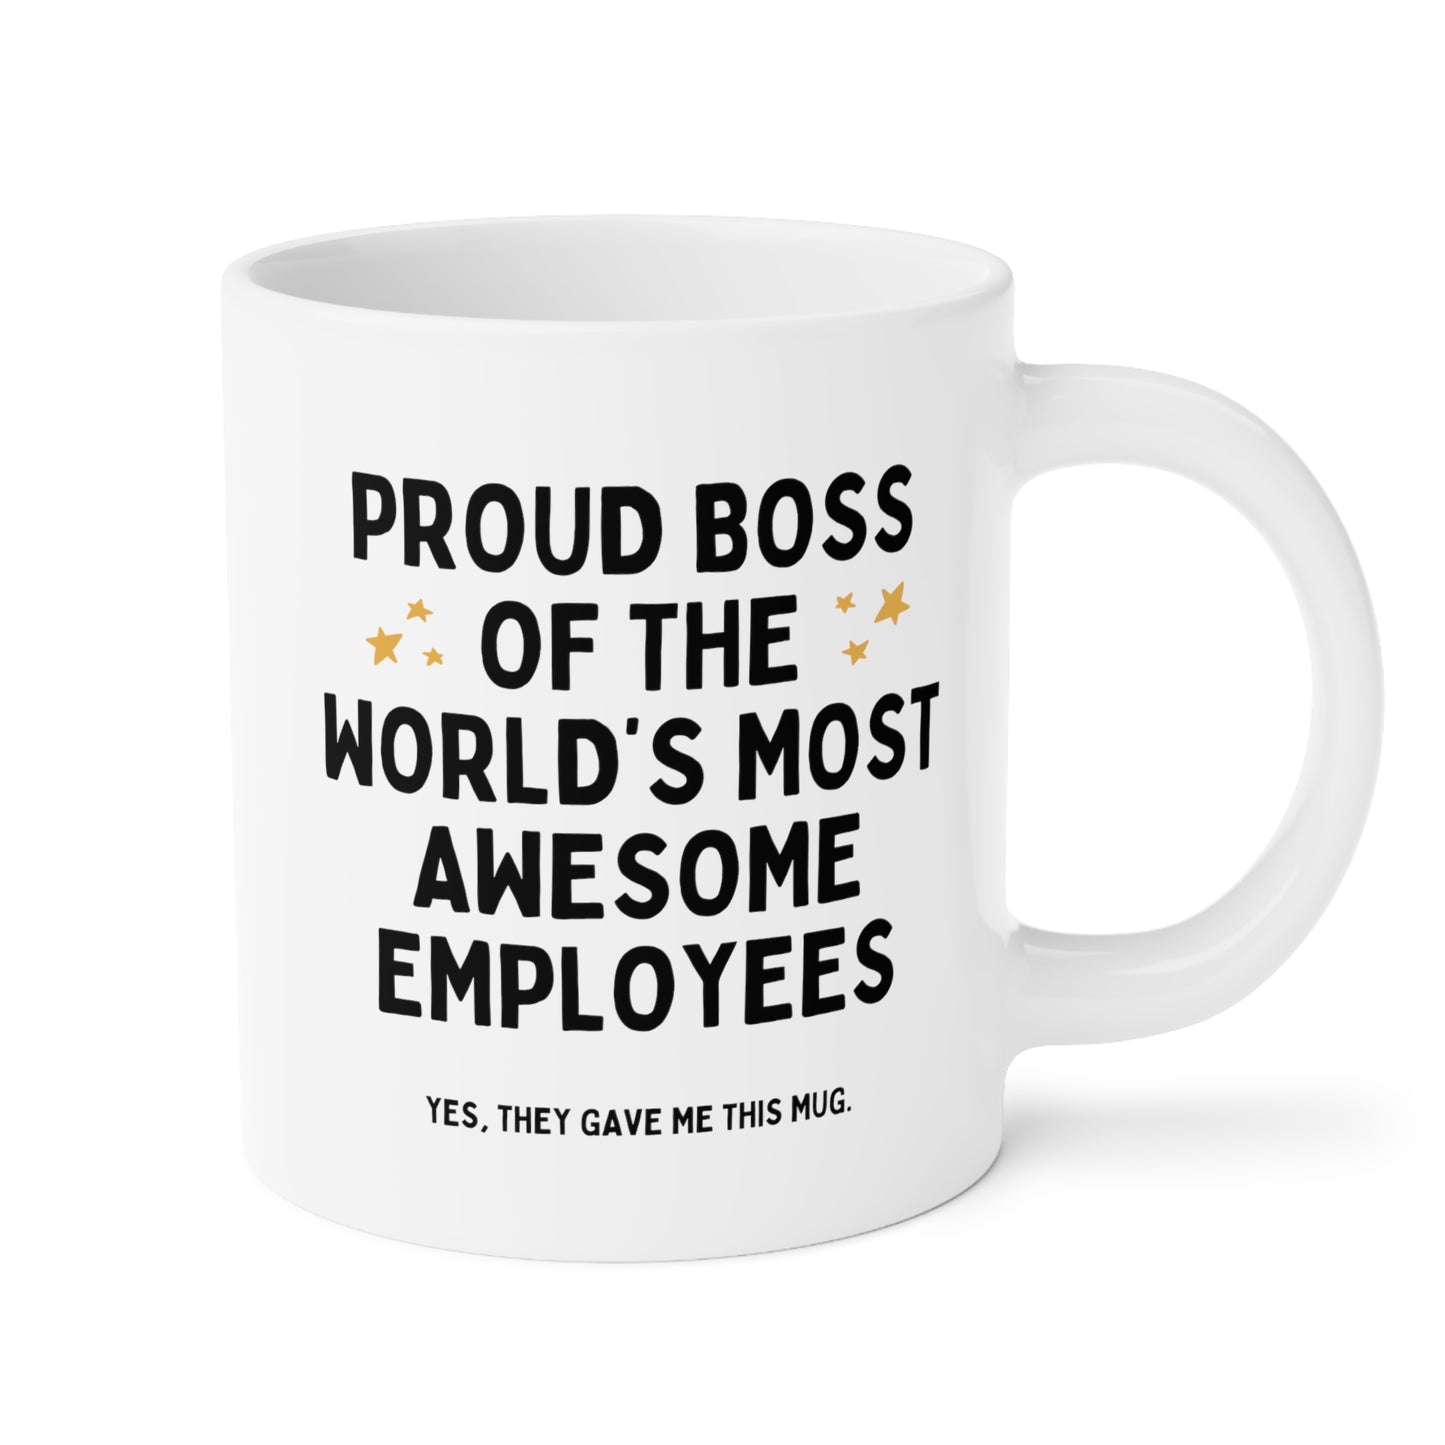 Proud Boss Of The World's Most Awesome Employees 20oz white funny large coffee mug gift for secret santa coworker supervisor appreciation waveywares wavey wares wavywares wavy wares